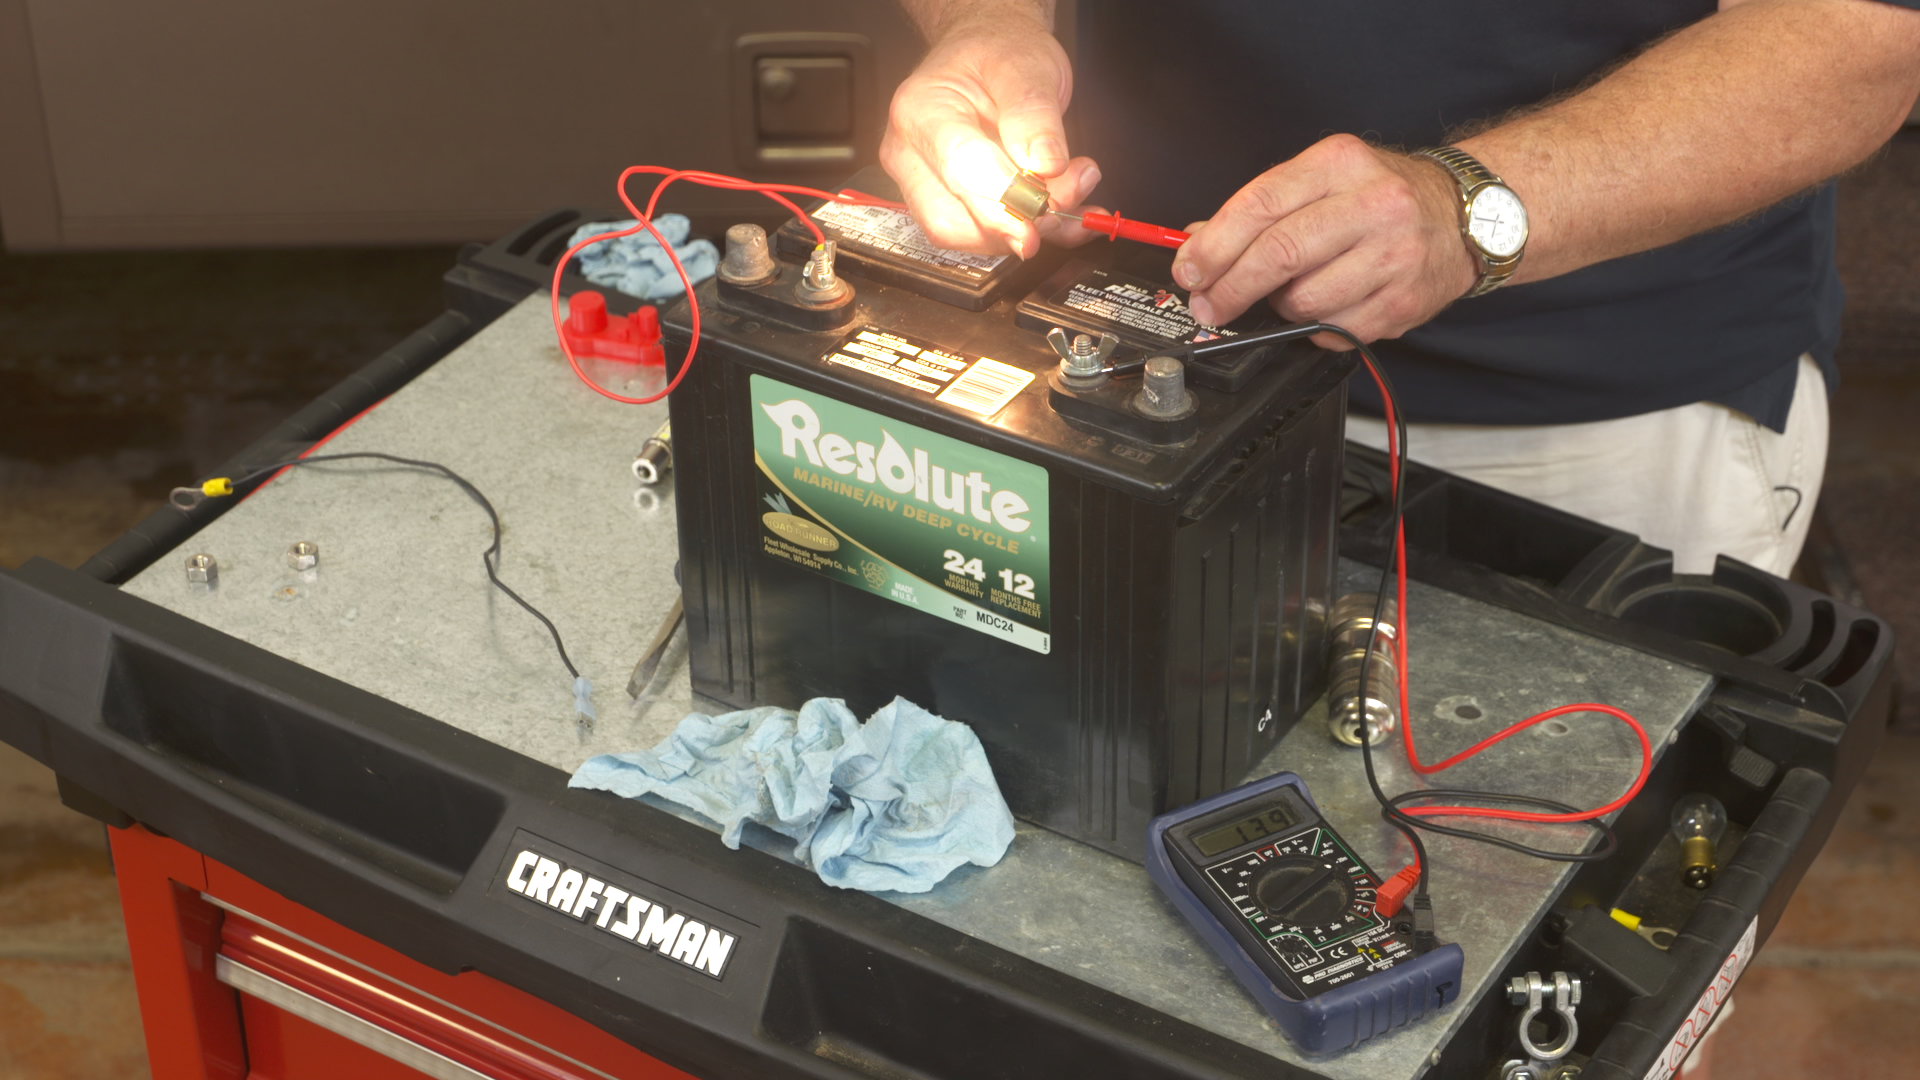 Session 10: Conserving Battery Power